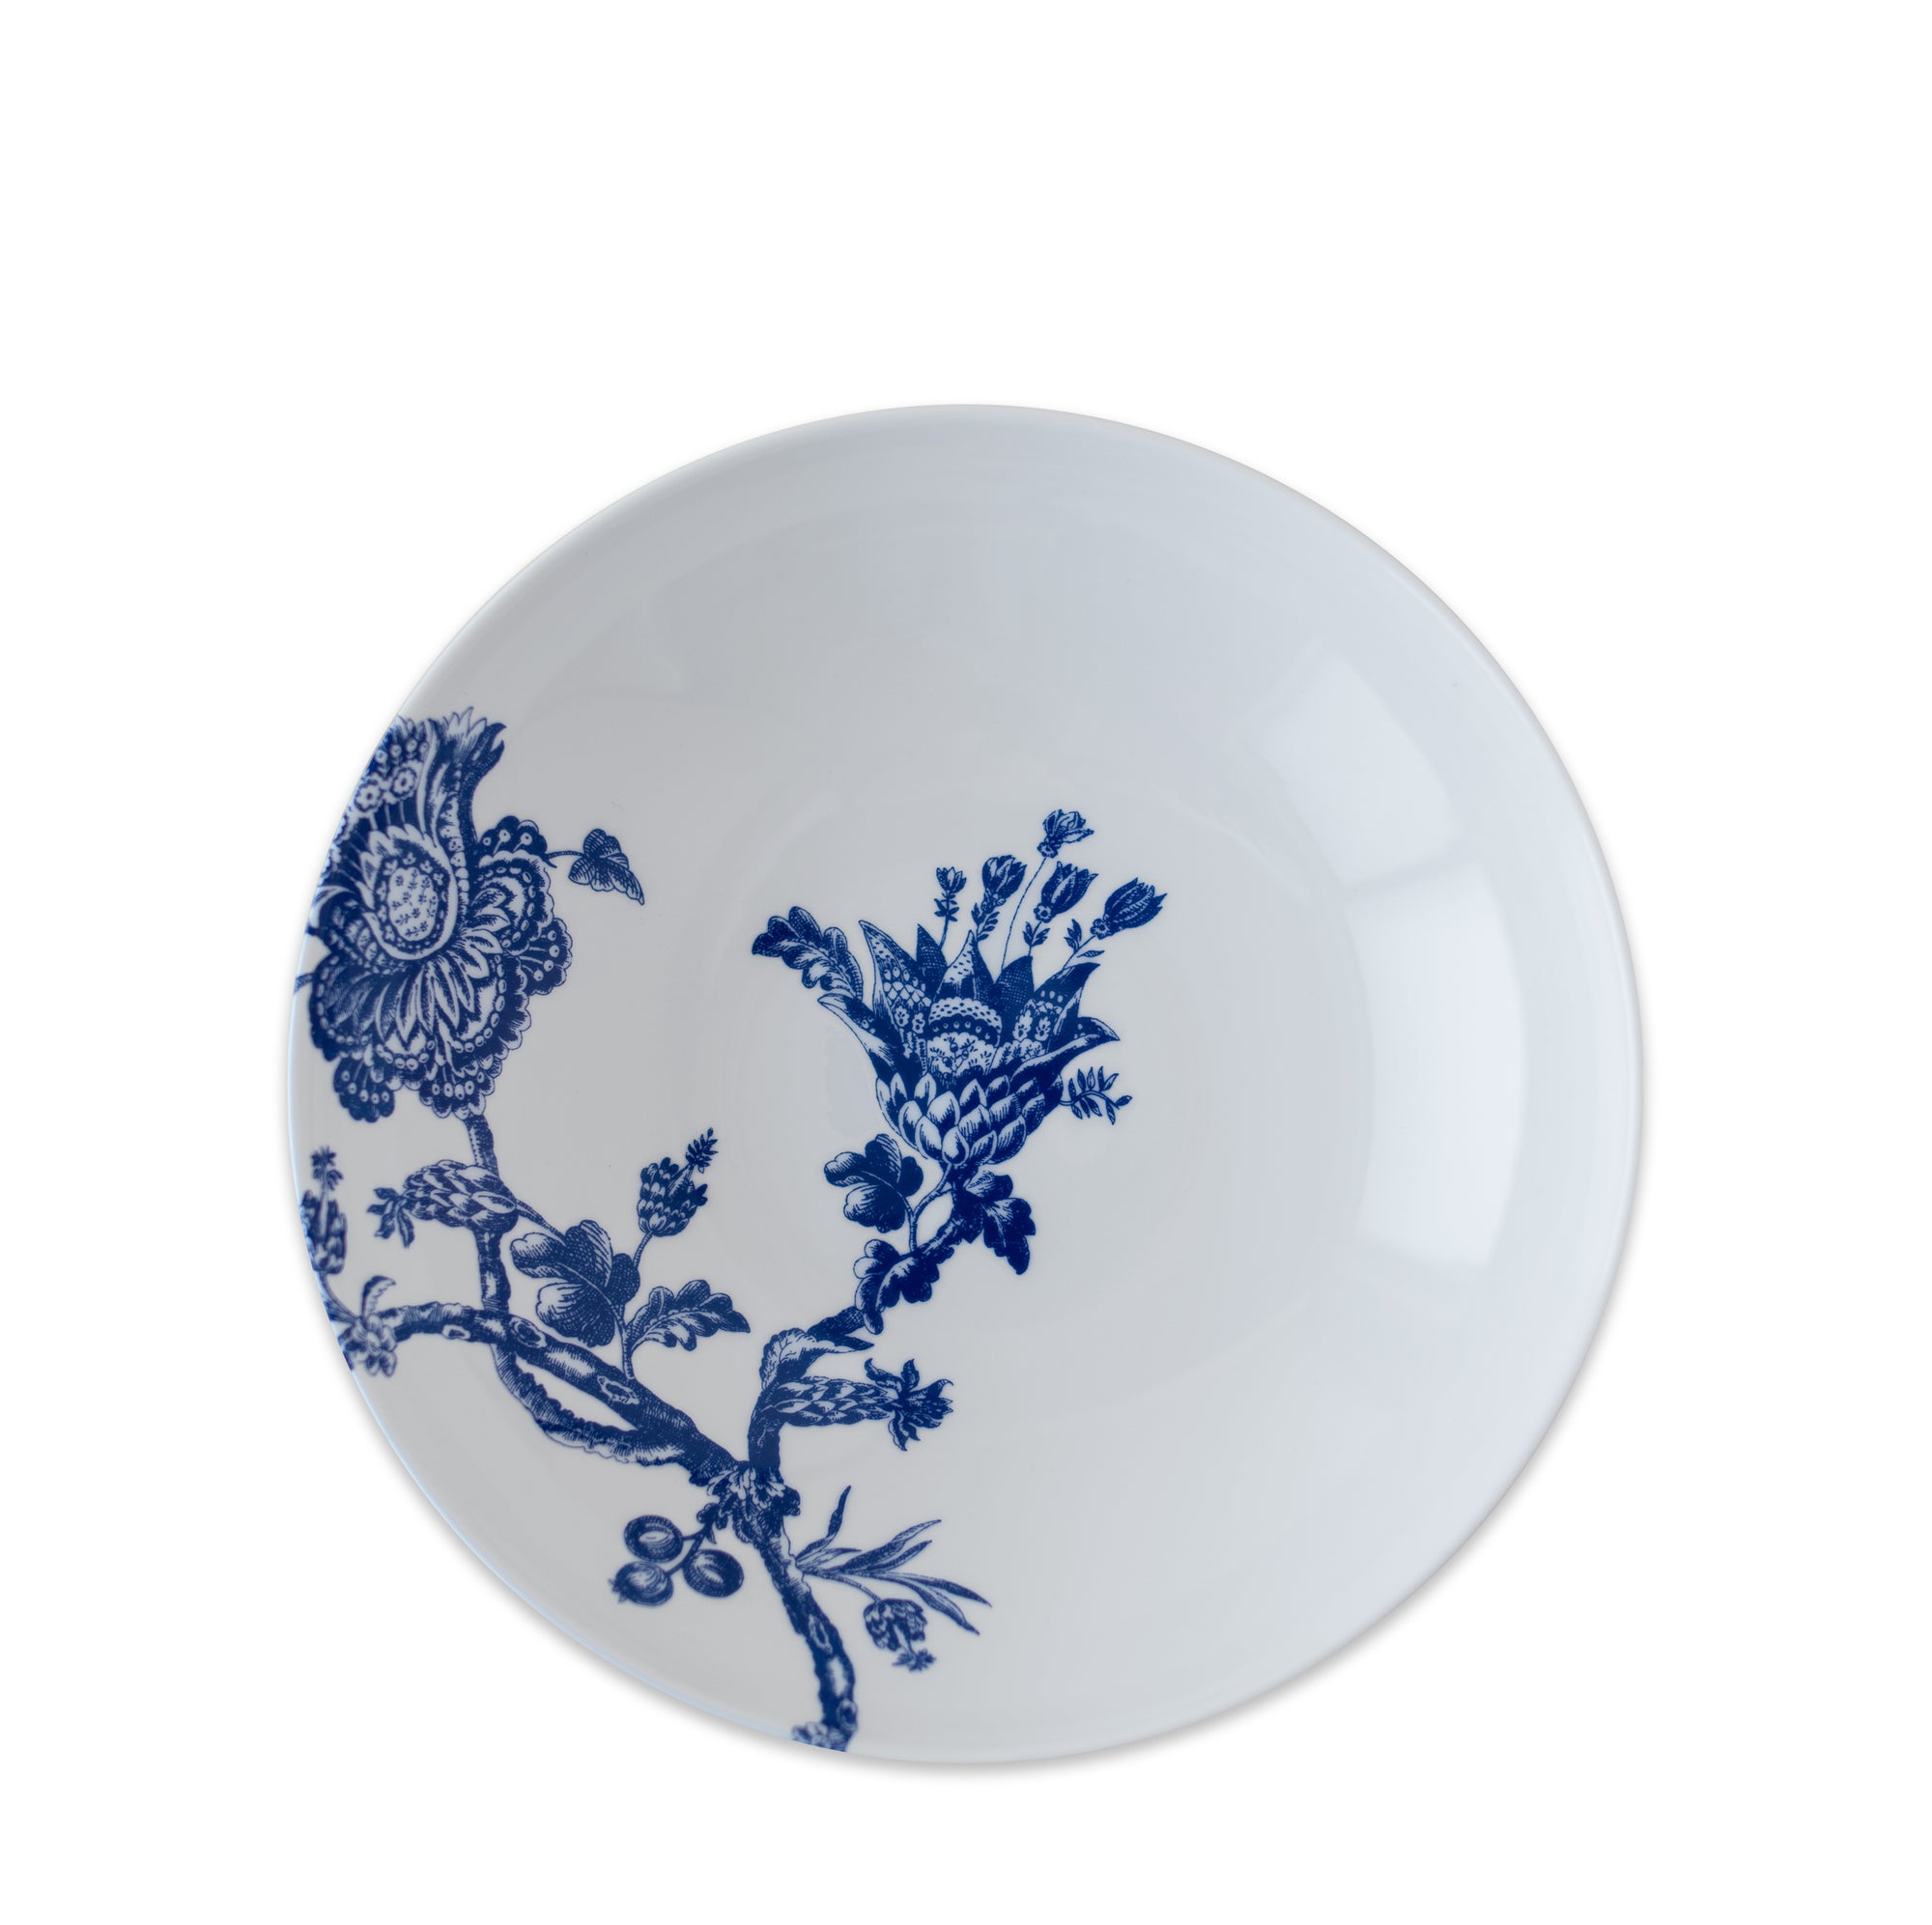 A generous white ceramic bowl with blue floral patterns on the inside, against a plain white background, showcasing the elegance of premium porcelain dinnerware inspired by the Williamsburg Foundation, the Arcadia Entrée Bowl by Caskata Artisanal Home.